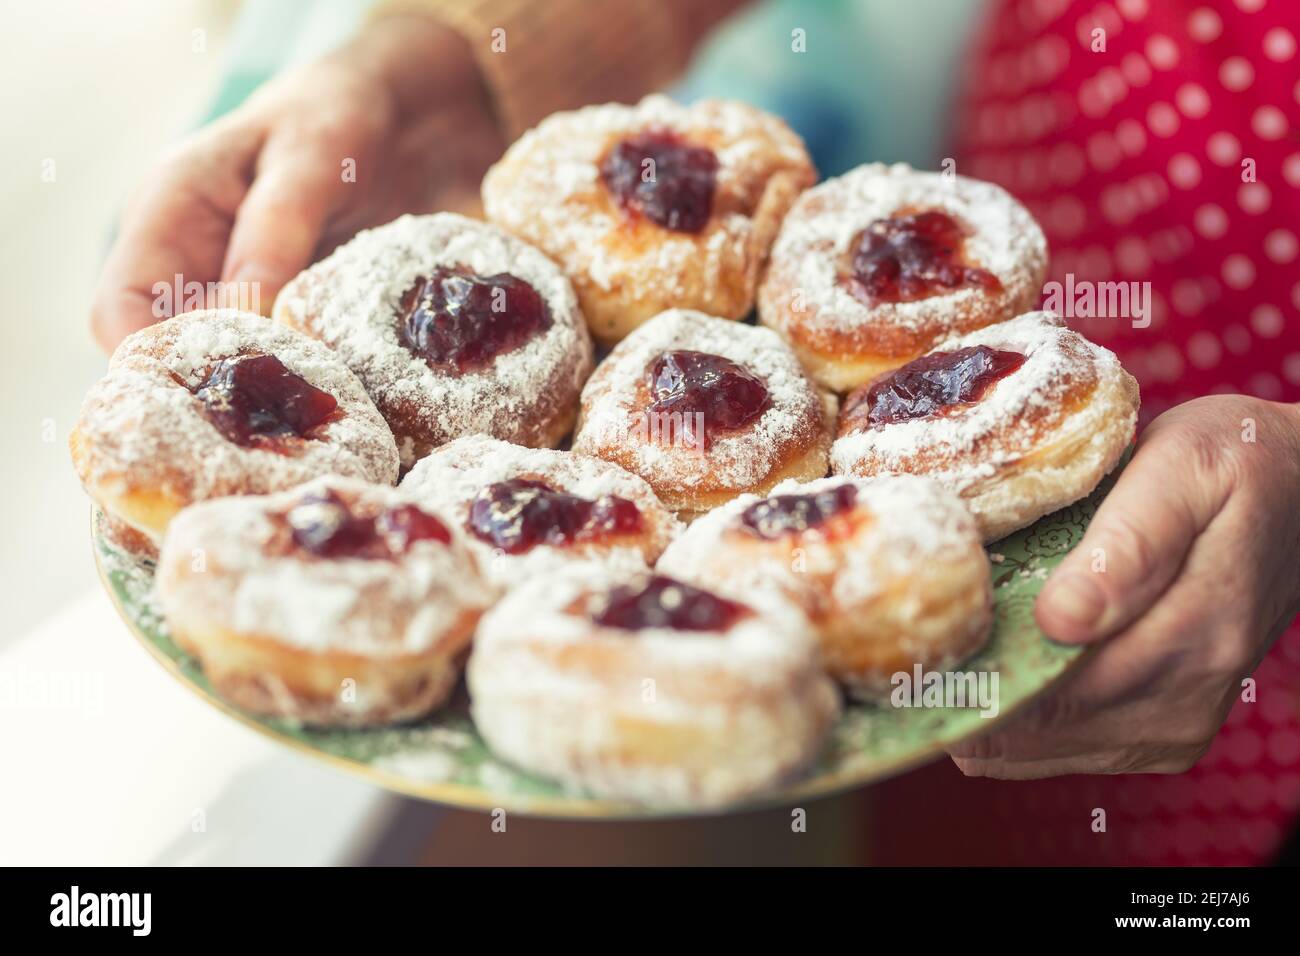 Plate full of jam-filled donuts with sugar coating held in the hands of an older woman. Stock Photo